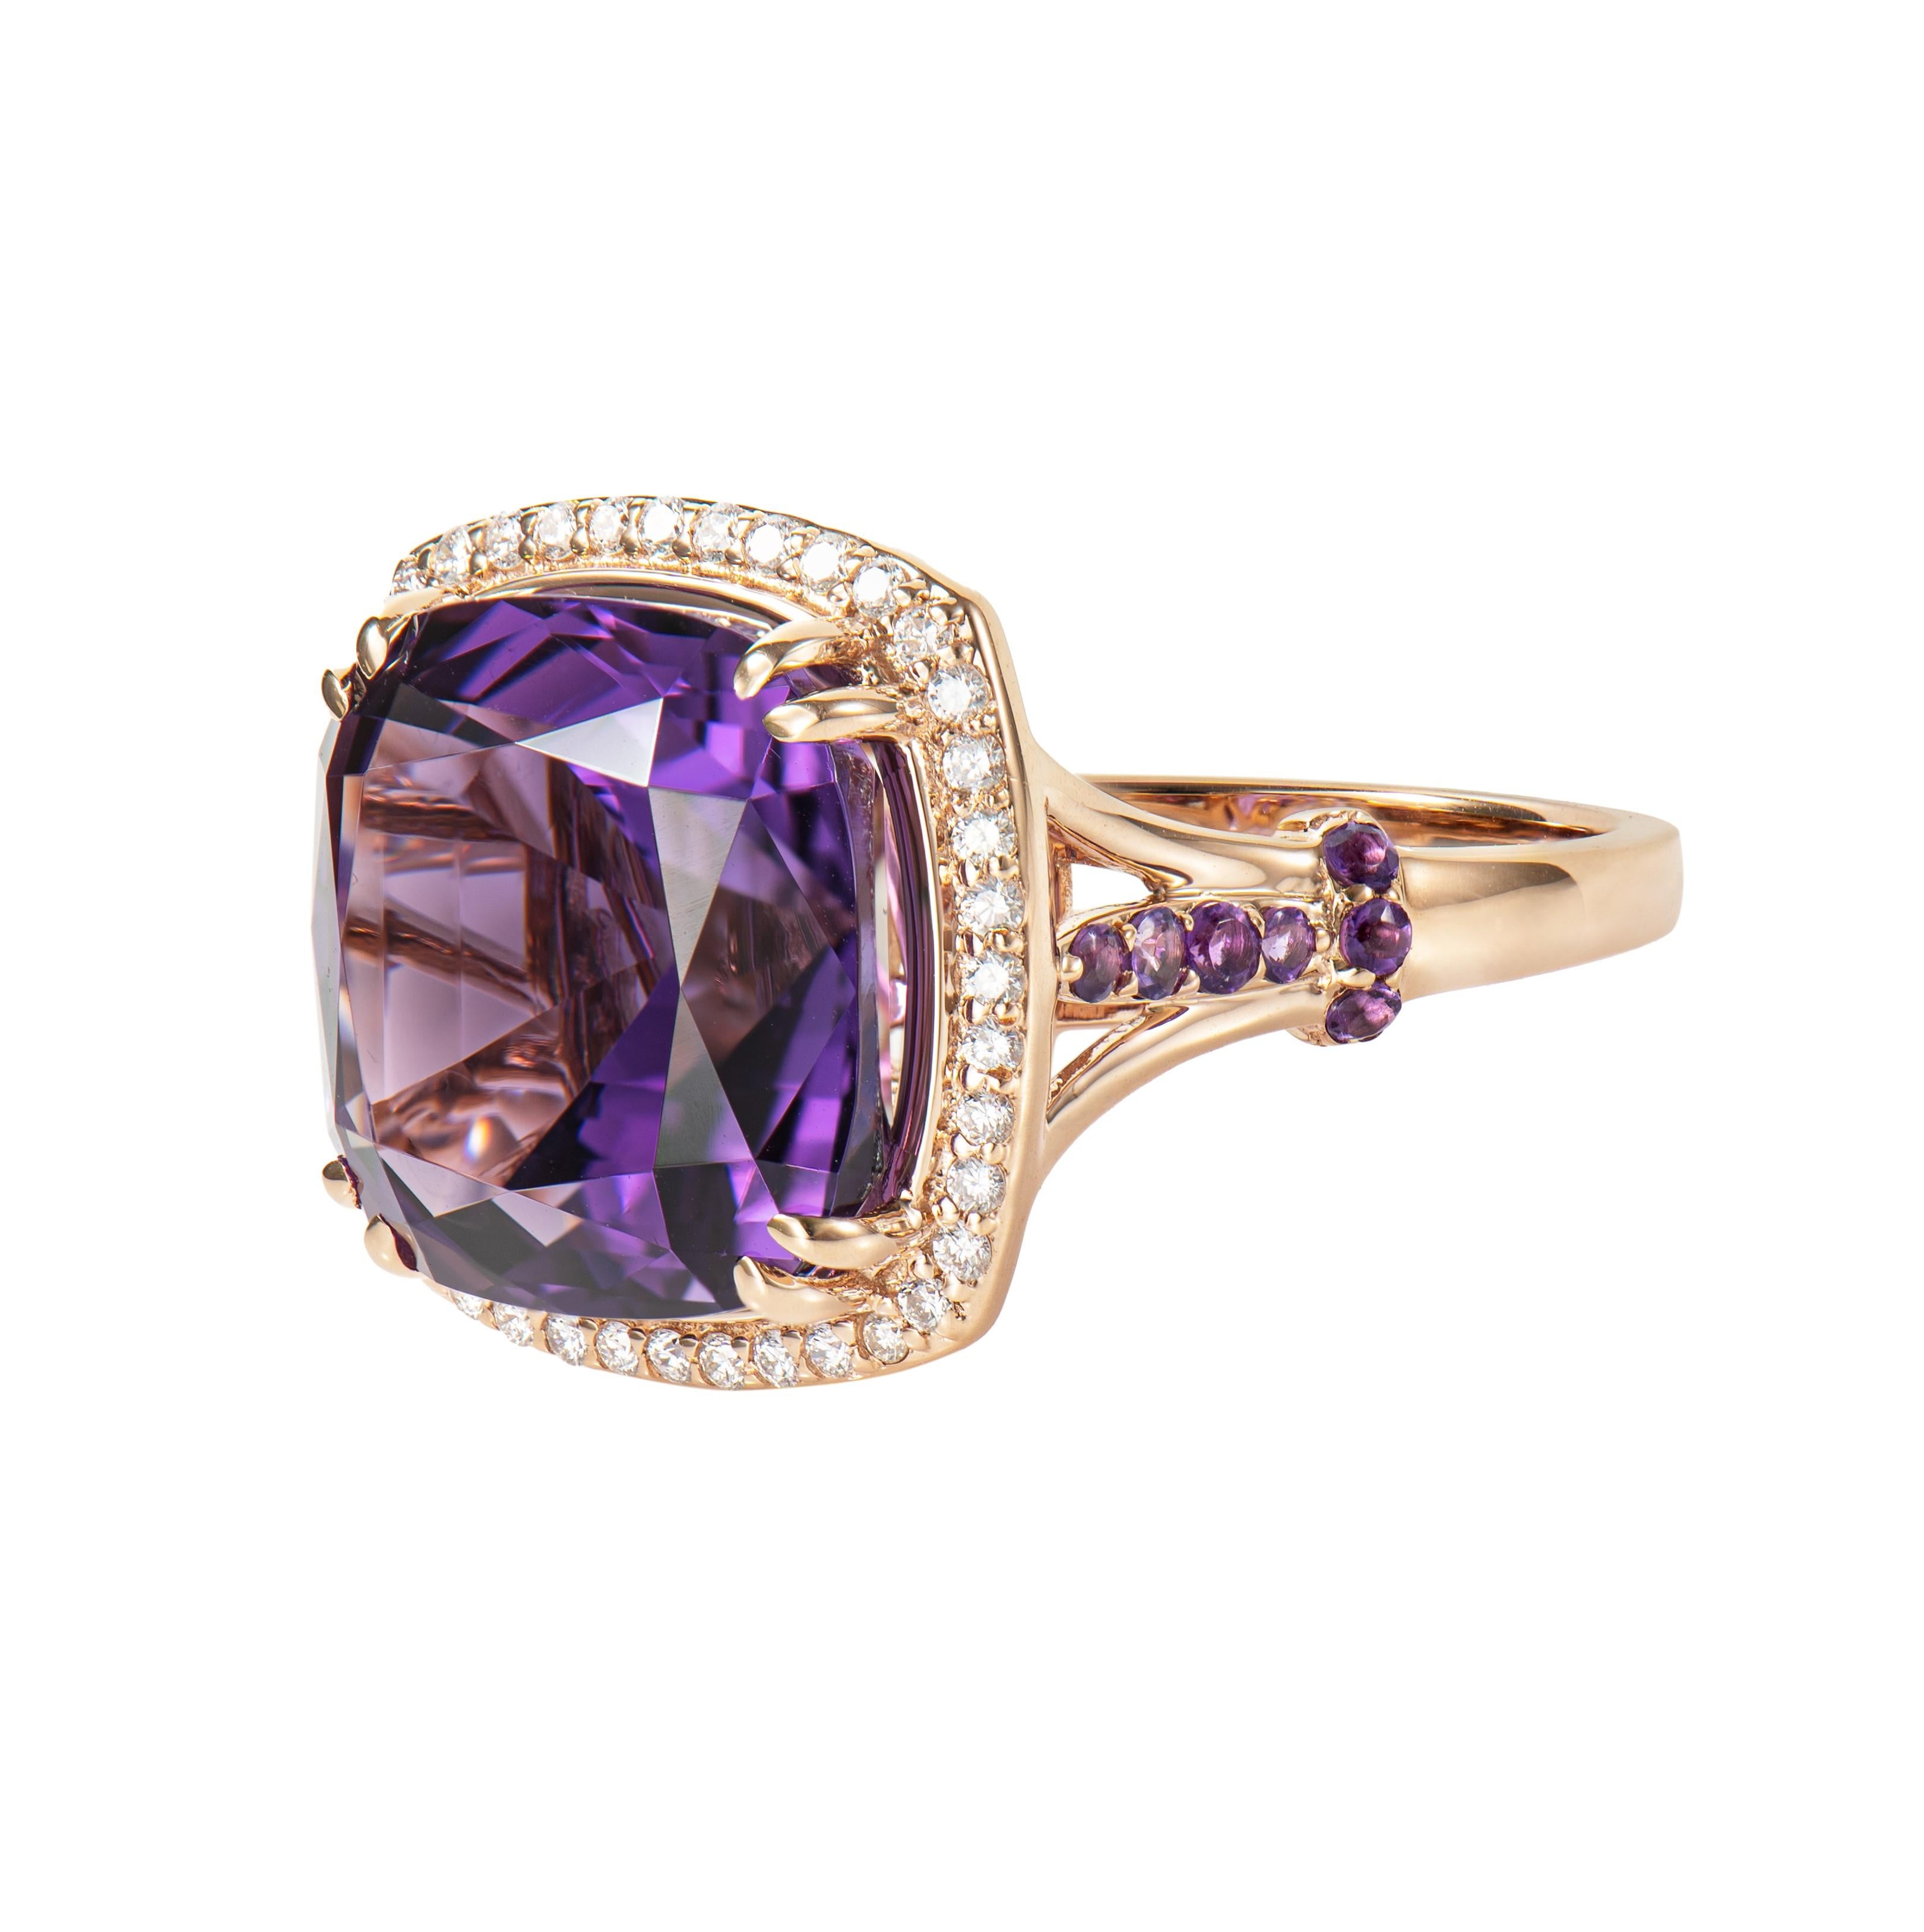 Cushion Cut 11.50 Carat Amethyst Cocktail Ring in 18 Karat Rose Gold with Diamond. For Sale